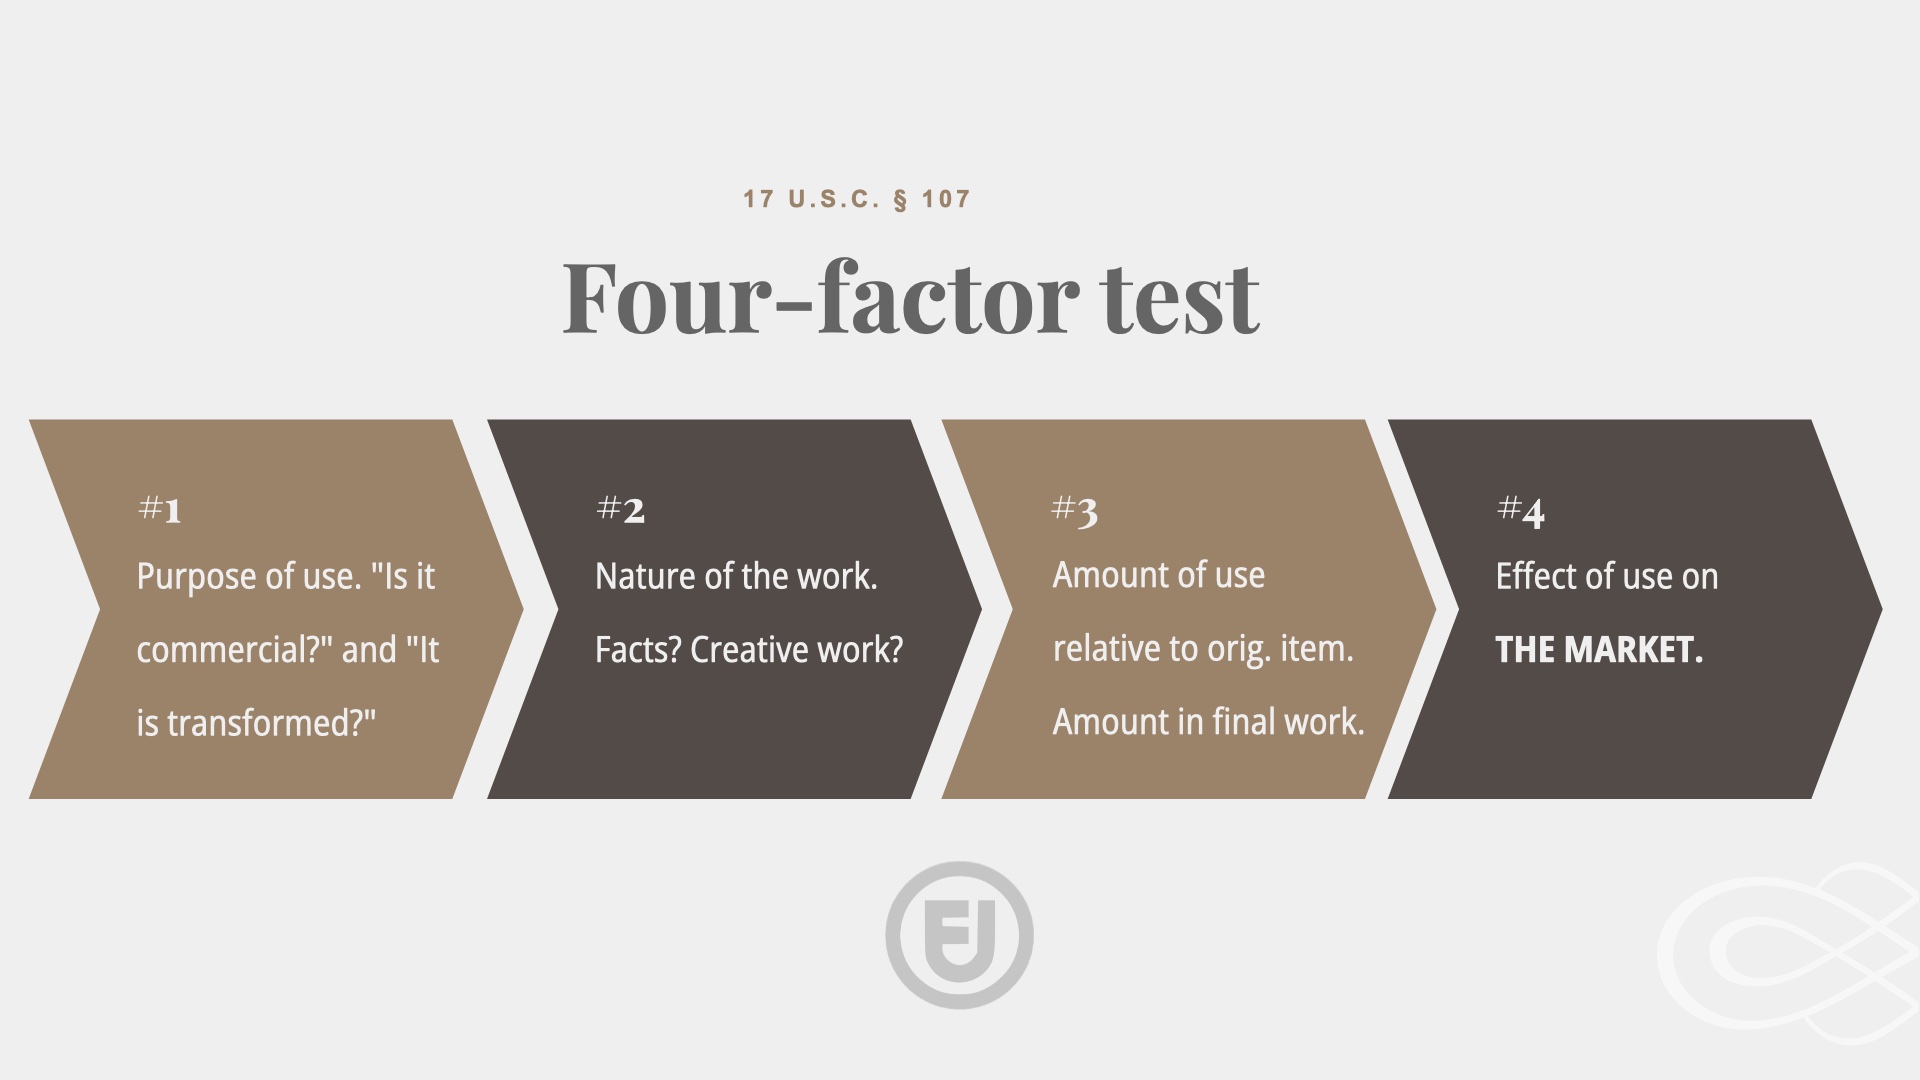 Four Factor test: 1. purpose of use 2. nature of work. 3. Amout of use relative to original item. 4. Effect of use on THE MARKET